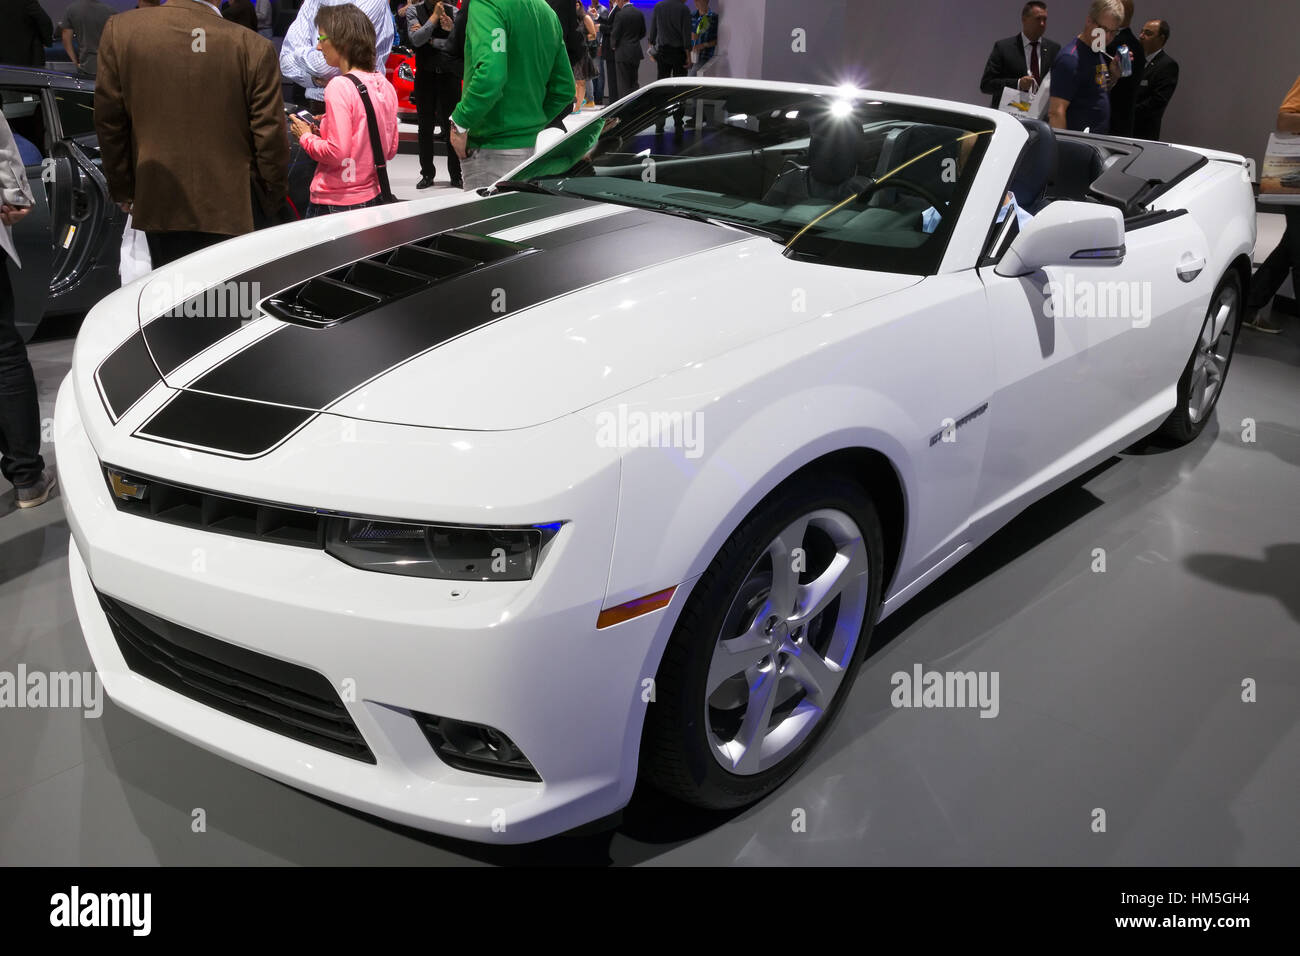 FRANKFURT, GERMANY - SEP 13: Chevrolet Camaro at the IAA motor show on Sep 13, 2013 in Frankfurt. More than 1.000 exhibitors from 35 countries are pre Stock Photo